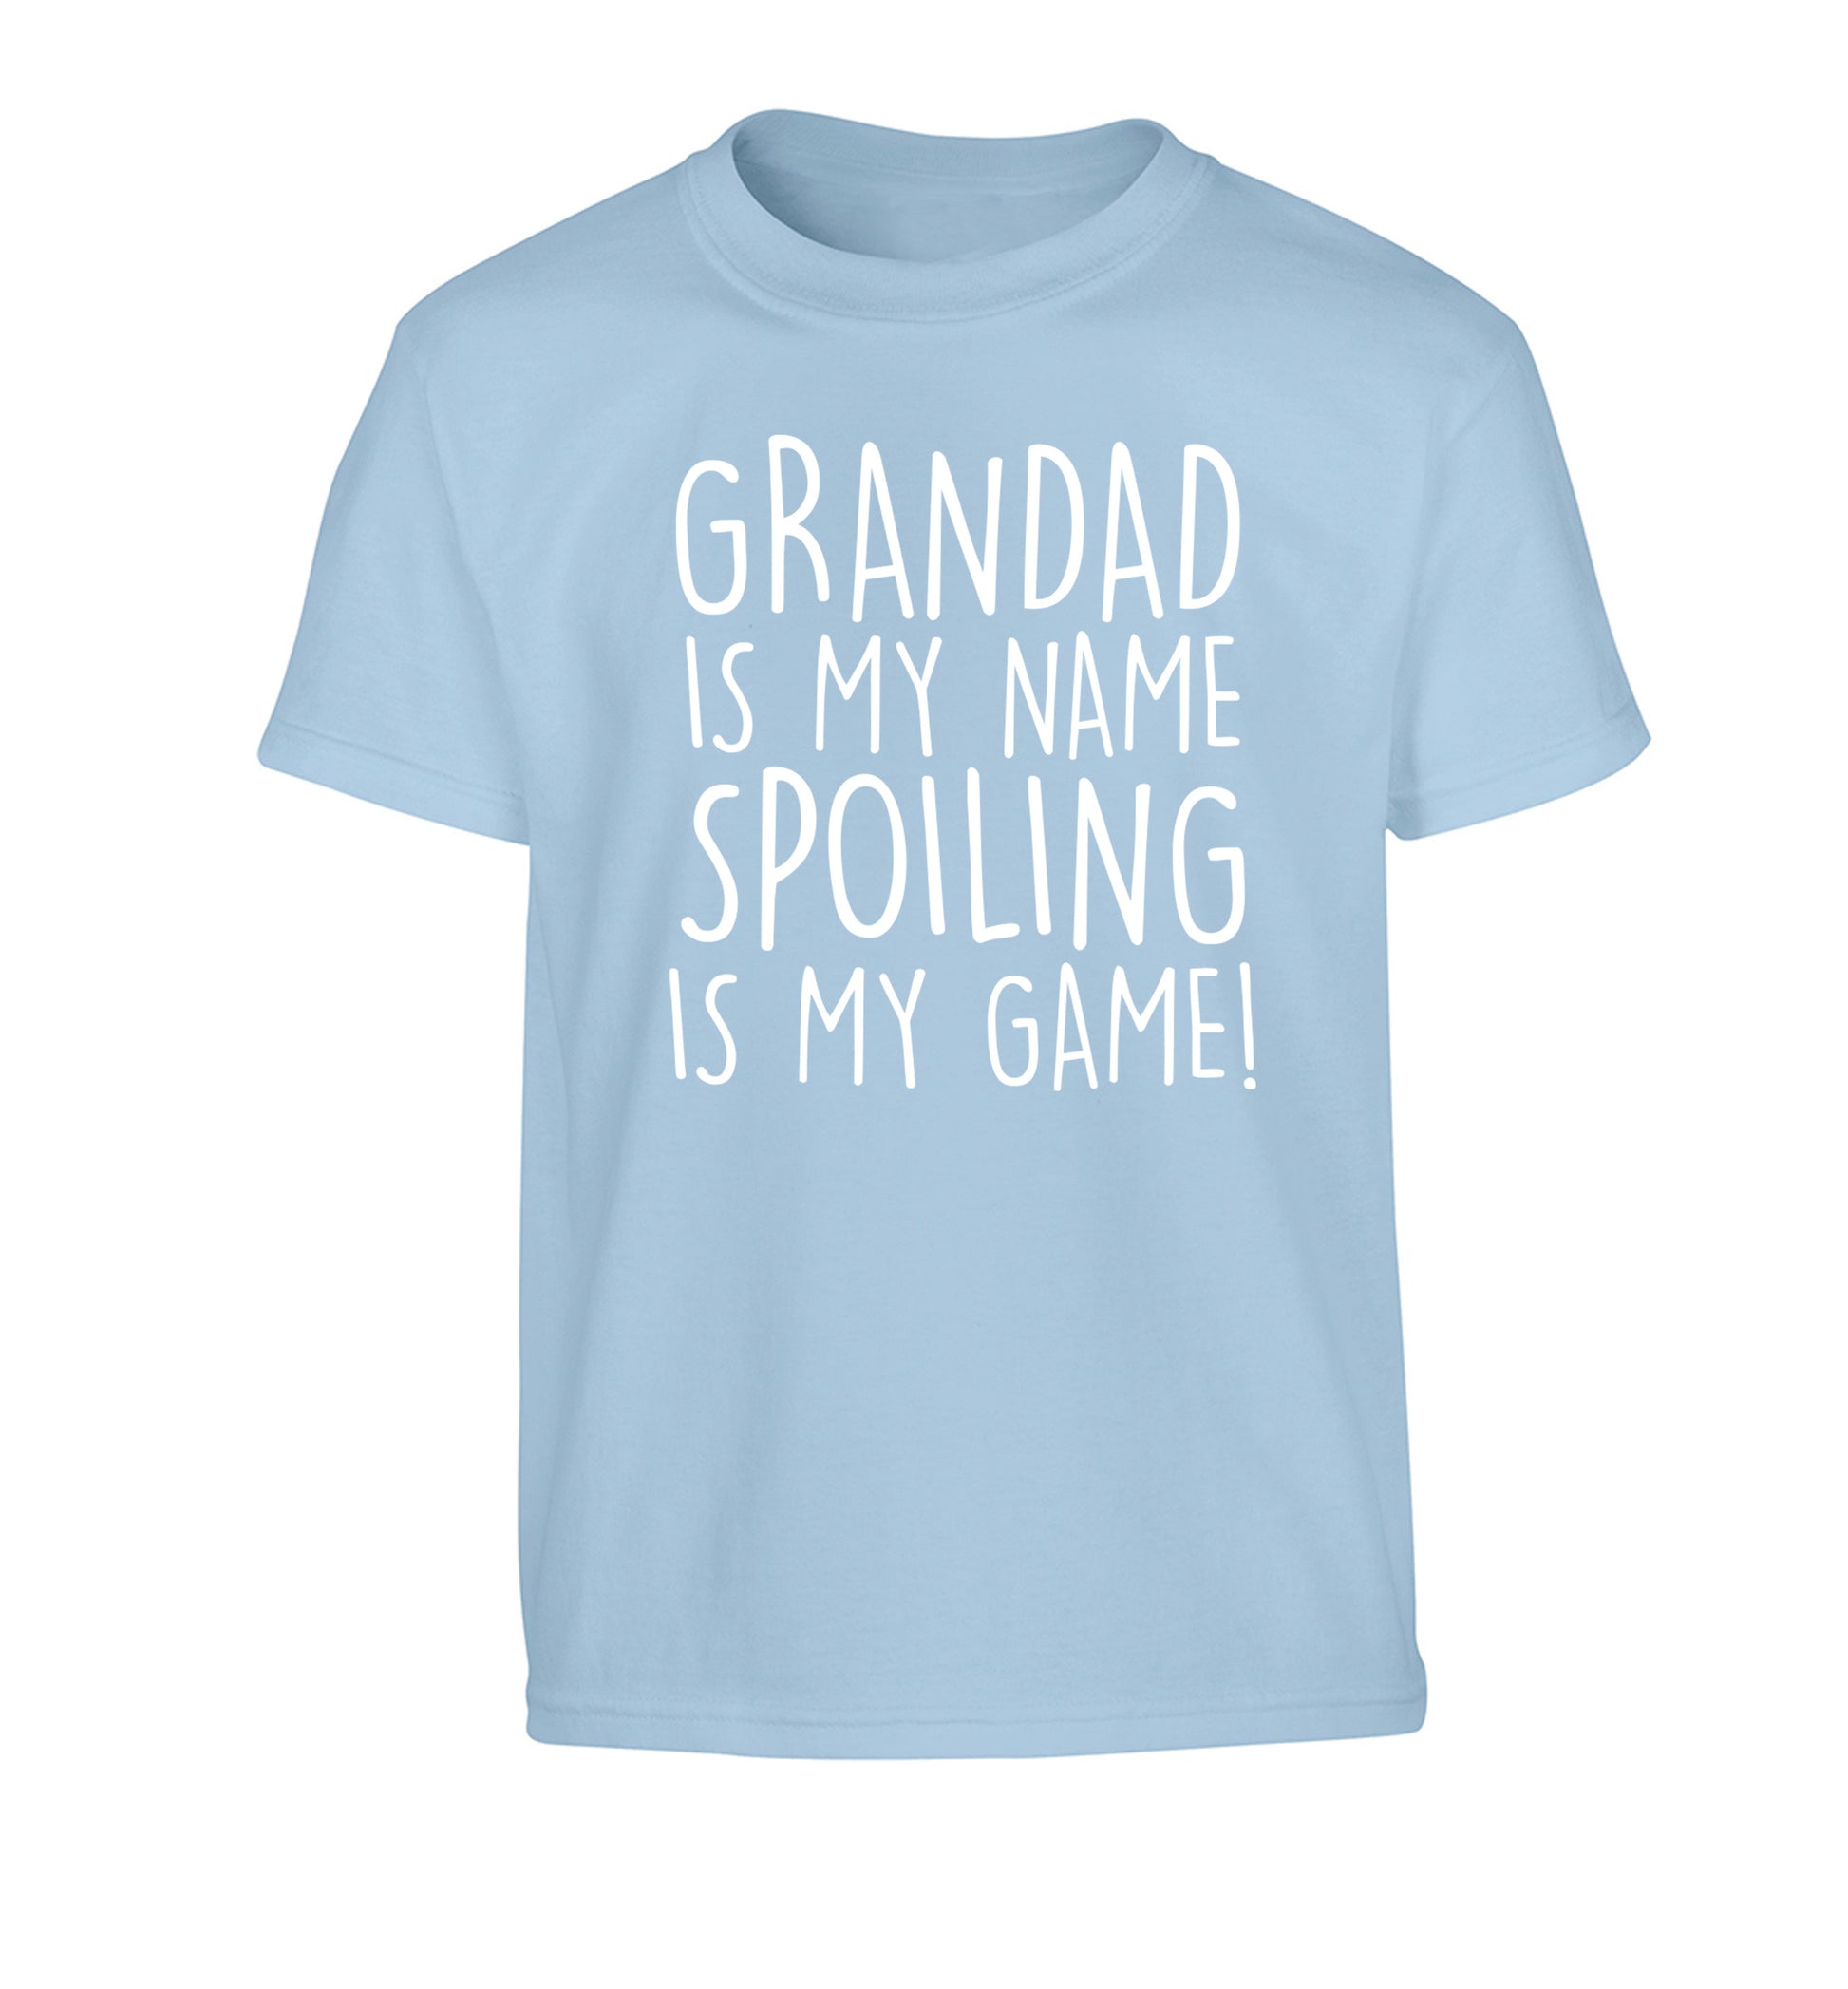 Grandad is my name, spoiling is my game Children's light blue Tshirt 12-14 Years